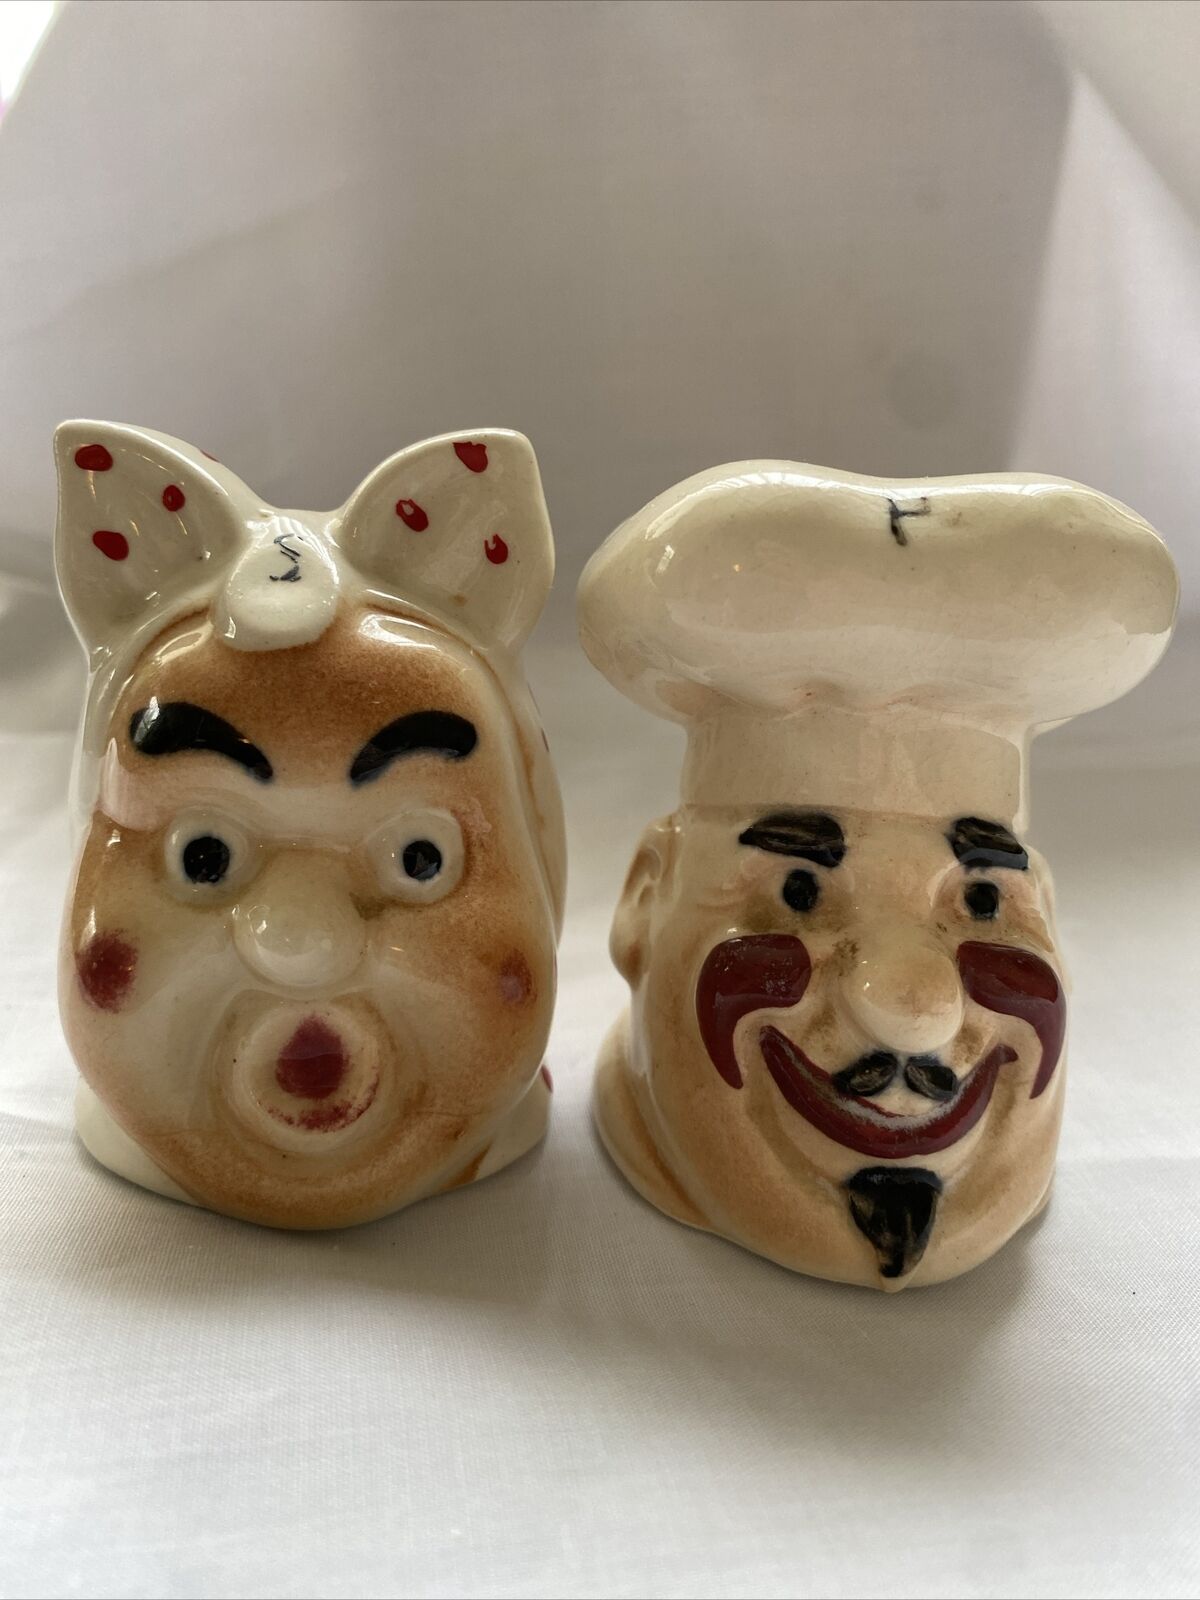 Vintage Whimsical Kitschy Chef Angry Cook Salt and Pepper Shakers Japan